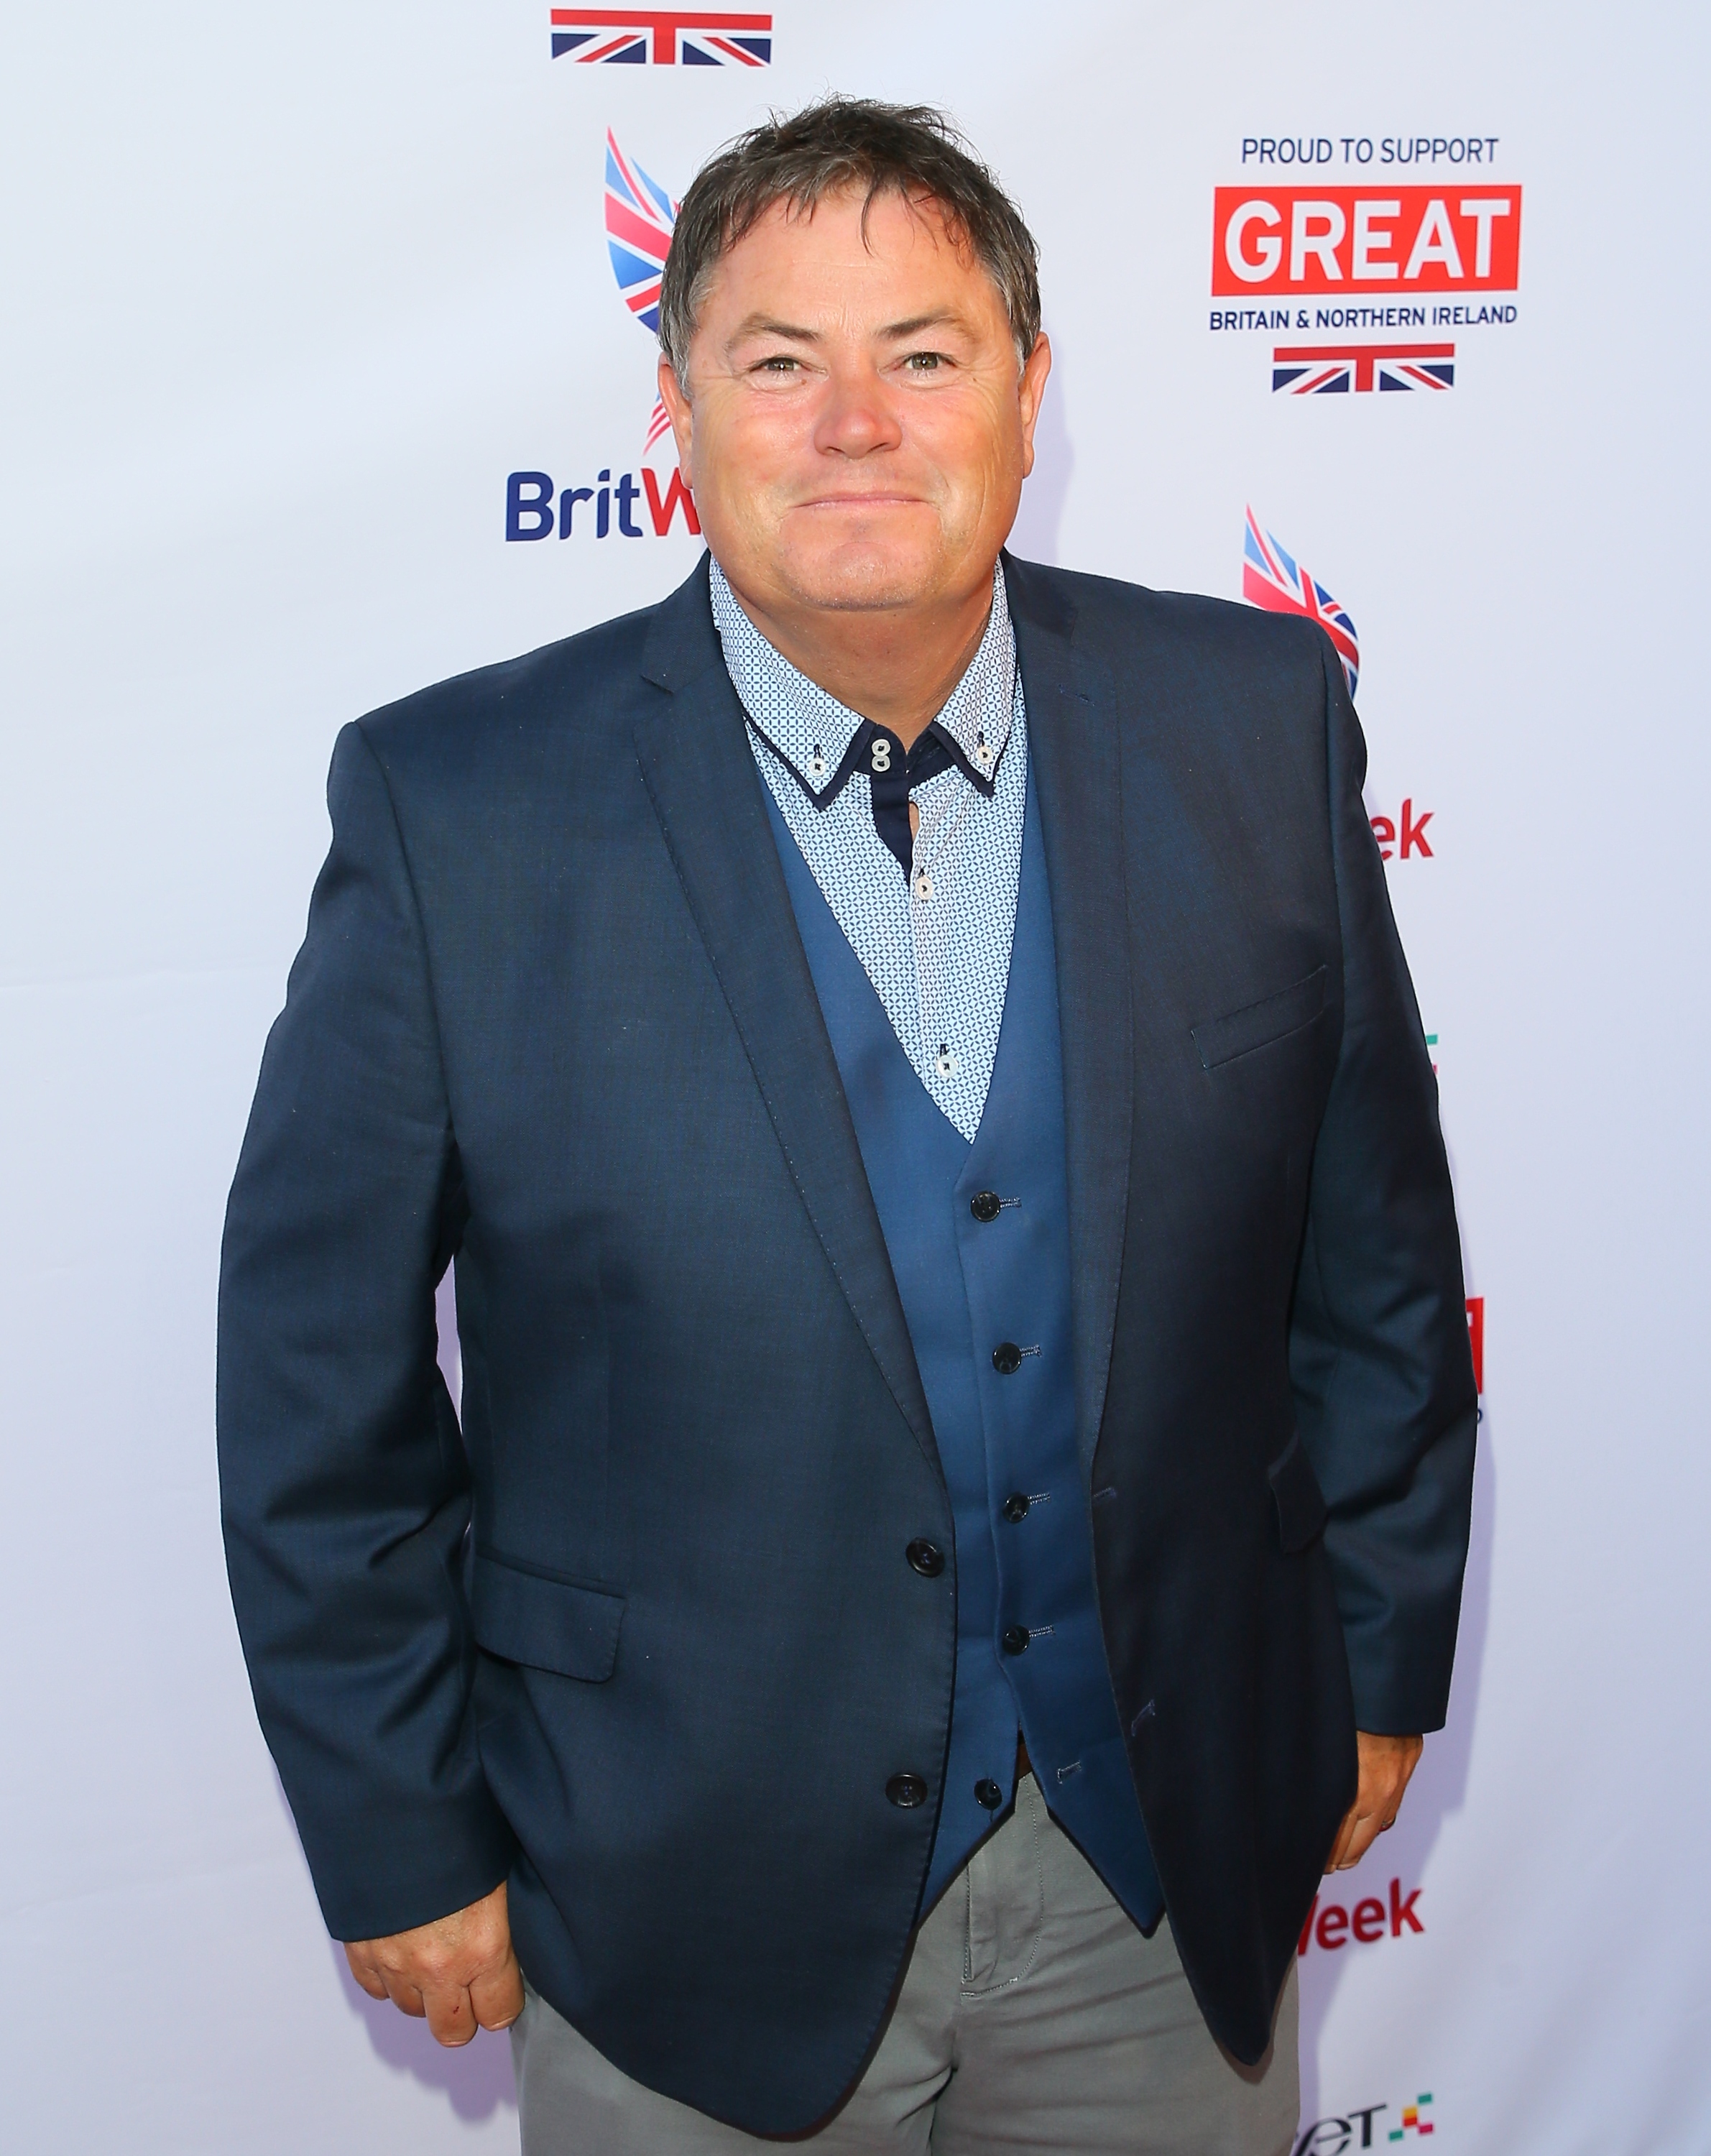 Mike Brewer said DPD 'didn't deliver his parcel'